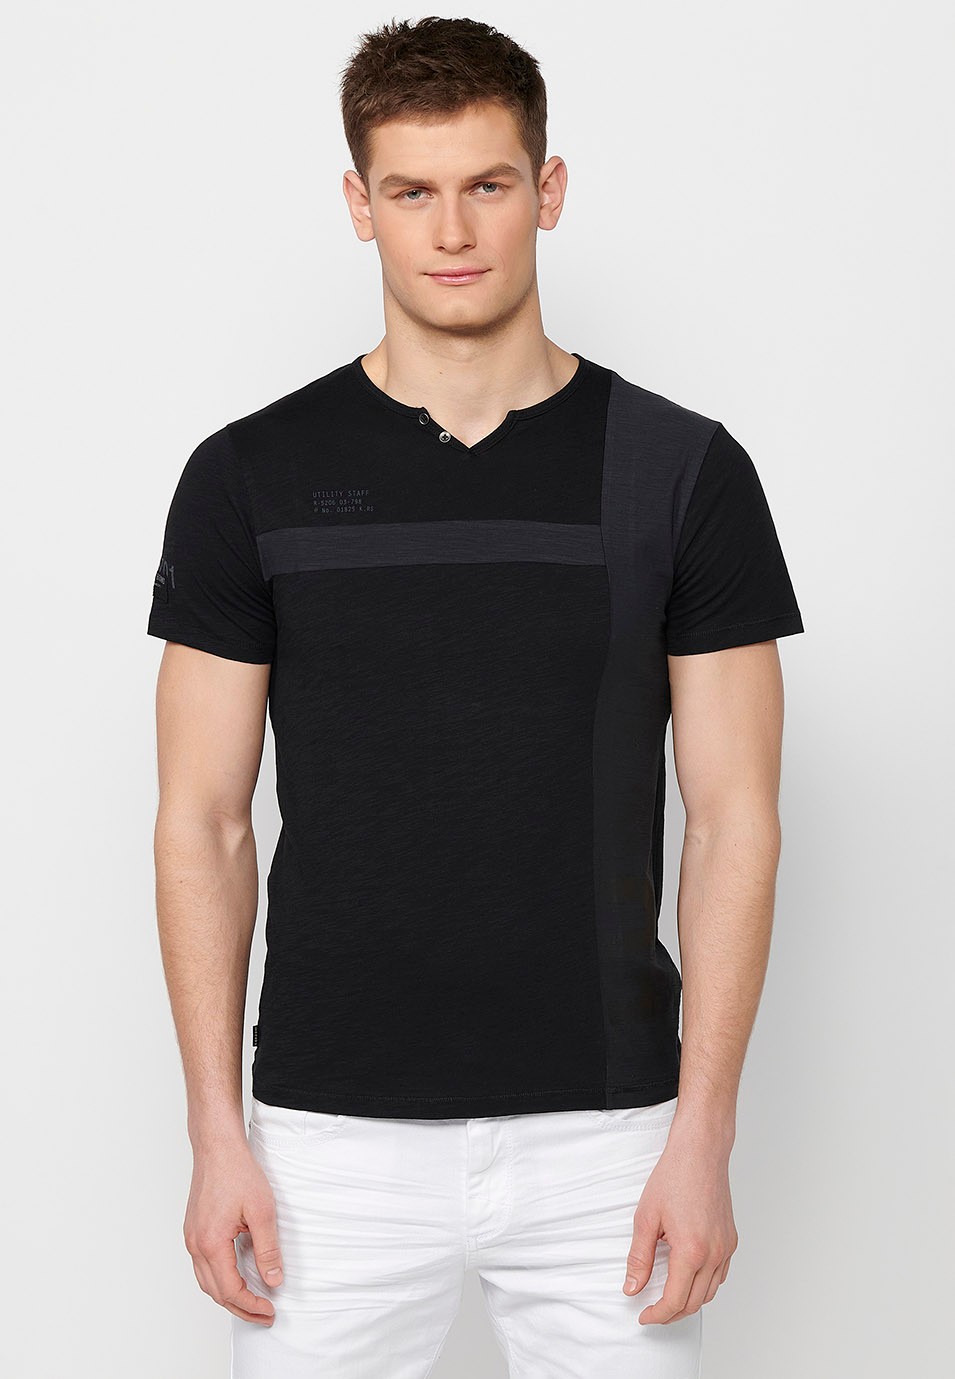  Men's black short-sleeved cotton t-shirt, round neck with button opening